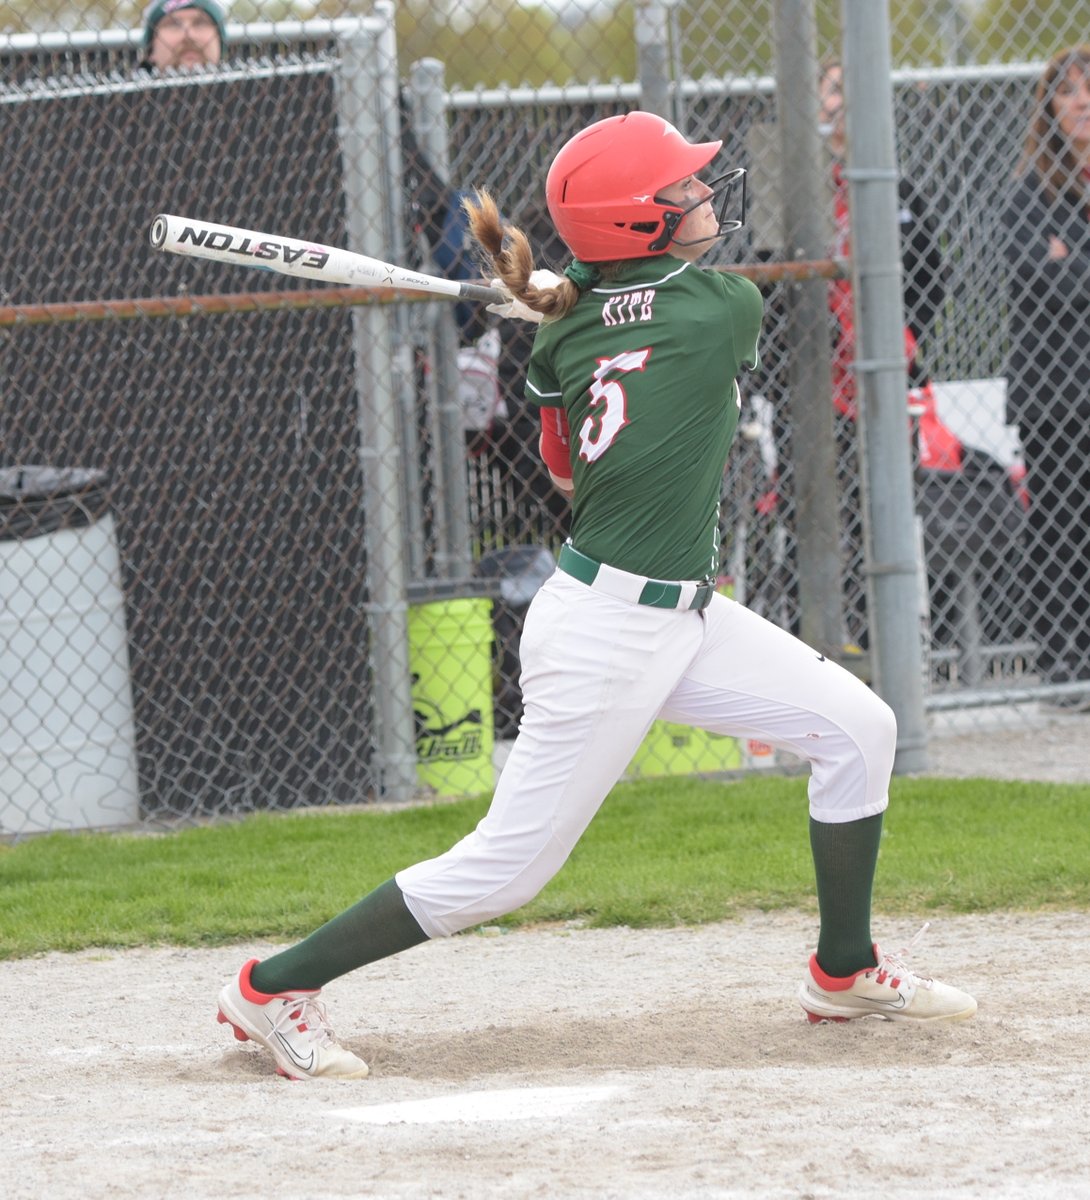 ☘️🥎 CONGRATS Kelly Kitz on being chosen to @CHSL1926 All-League Team!!! Member of Cardinal Division Champion @IrishSoftball_, Kelly batted .373 (25-for-67) with 20 RS, 3 doubles, & 13 RBI ... GO IRISH!!! #CentralToLife ☘️🥎 Click HERE for Release ⬇️ bit.ly/3QOzWs0